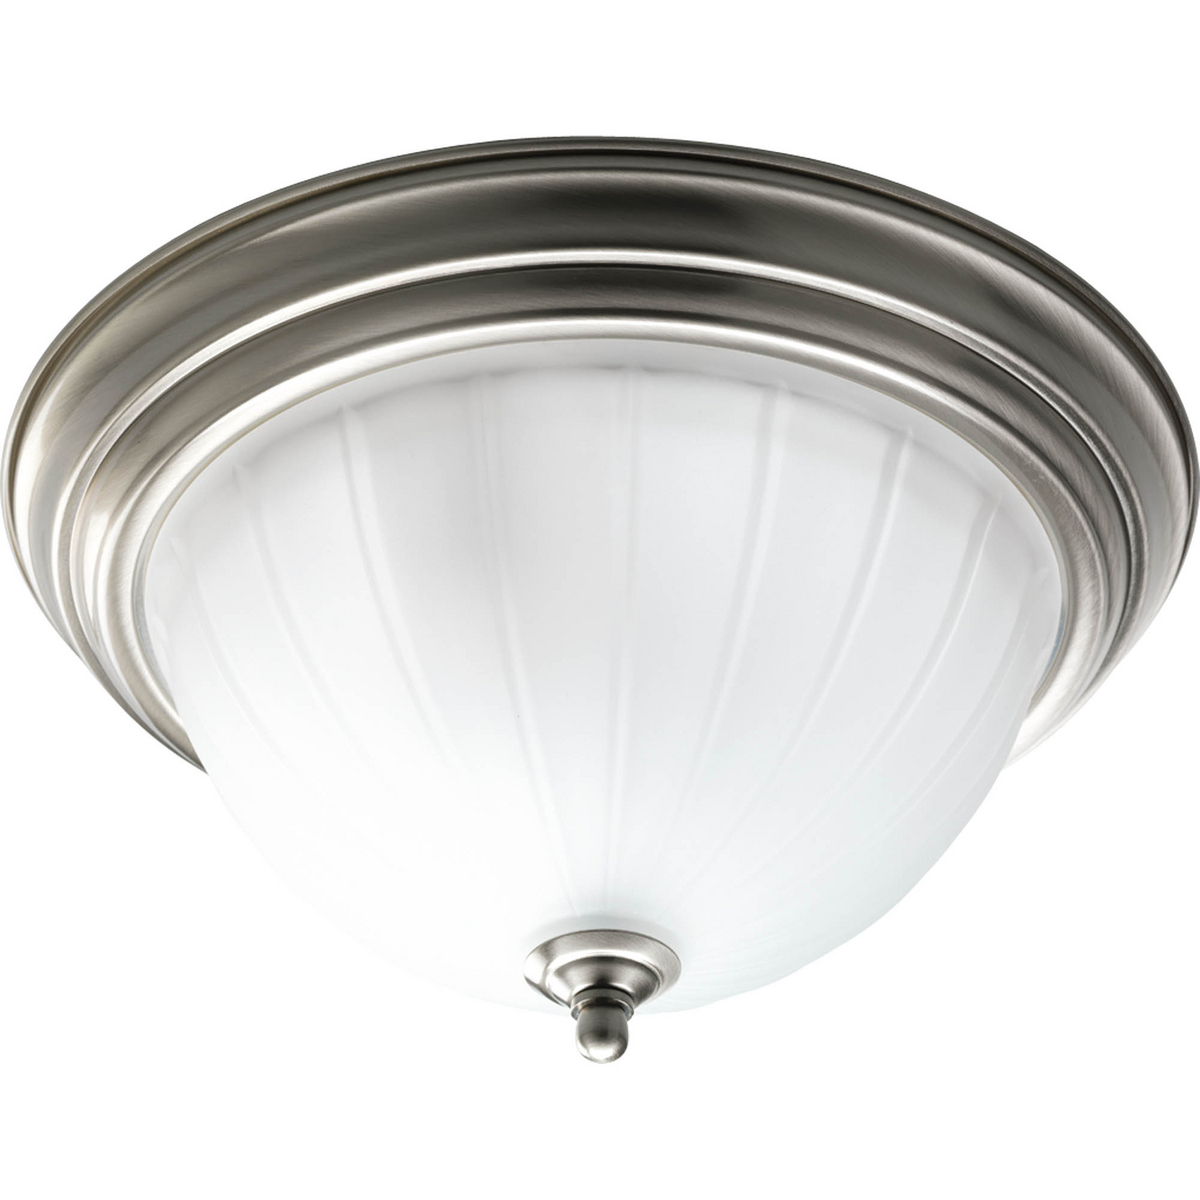 Two-light close-to-ceiling with etched ribbed melon glass with center lock up in Brushed Nickel finish.